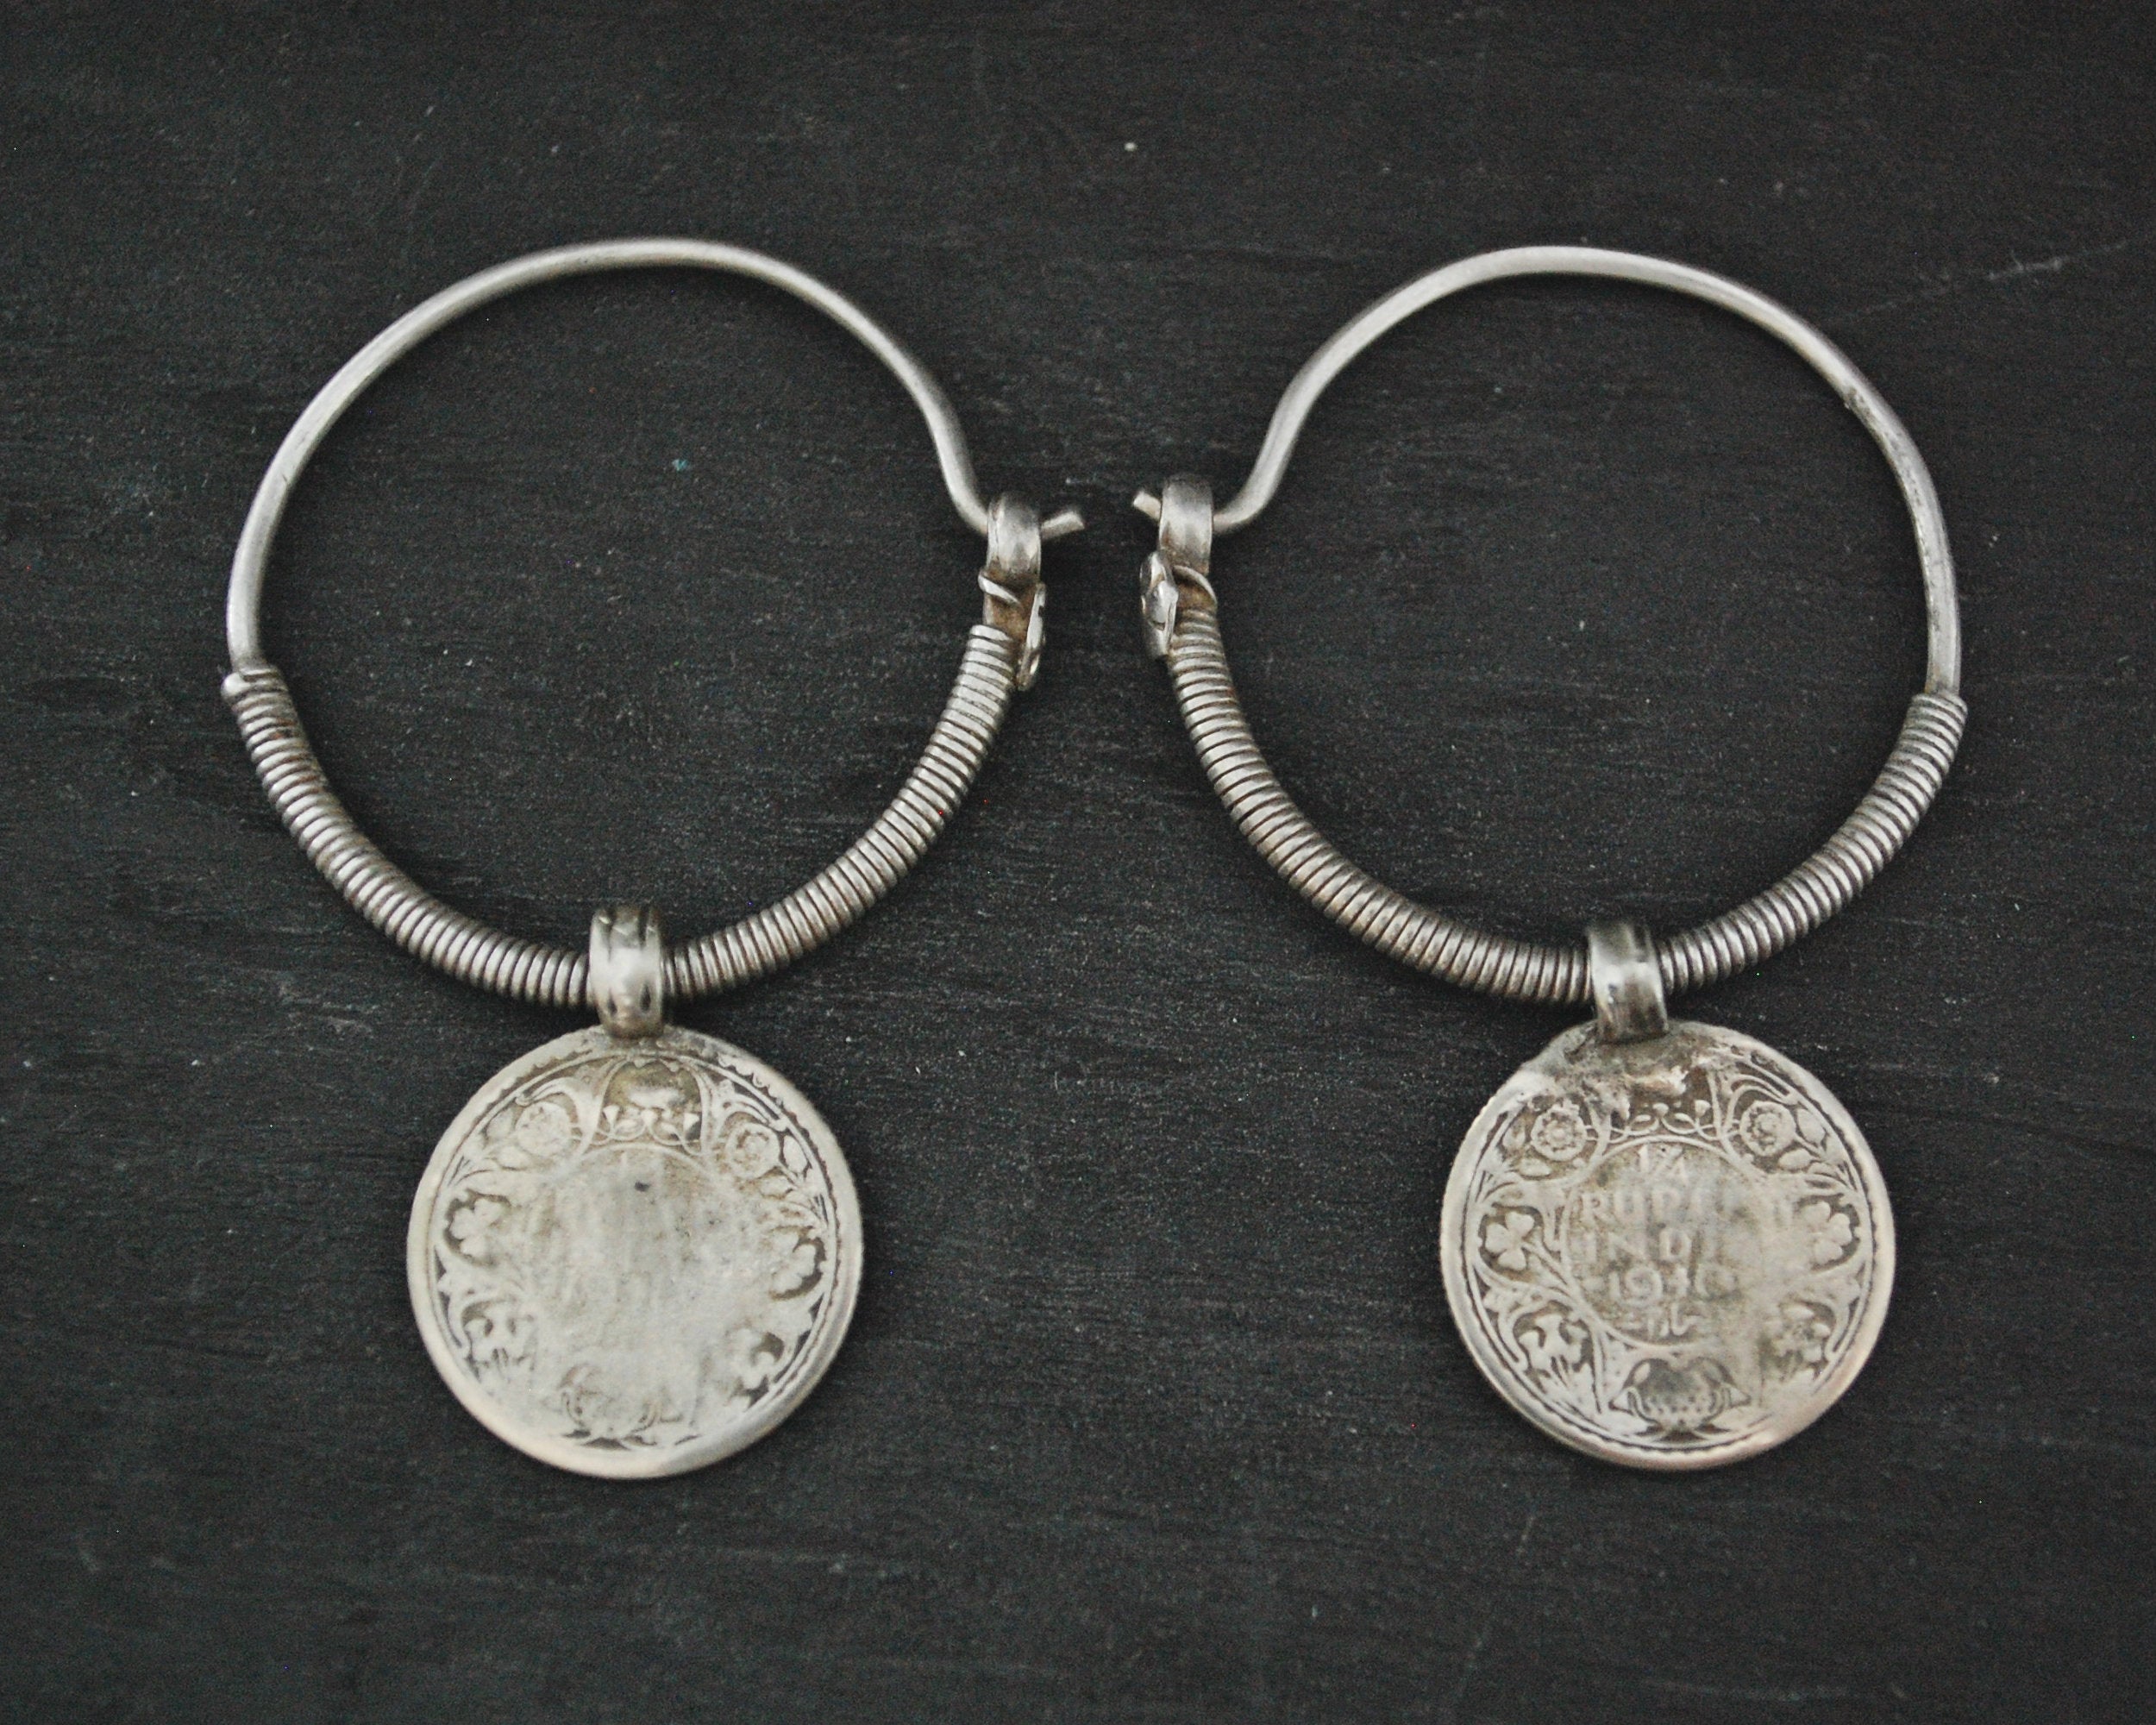 Tribal Indian Hoop Earrings with Coins - LARGE